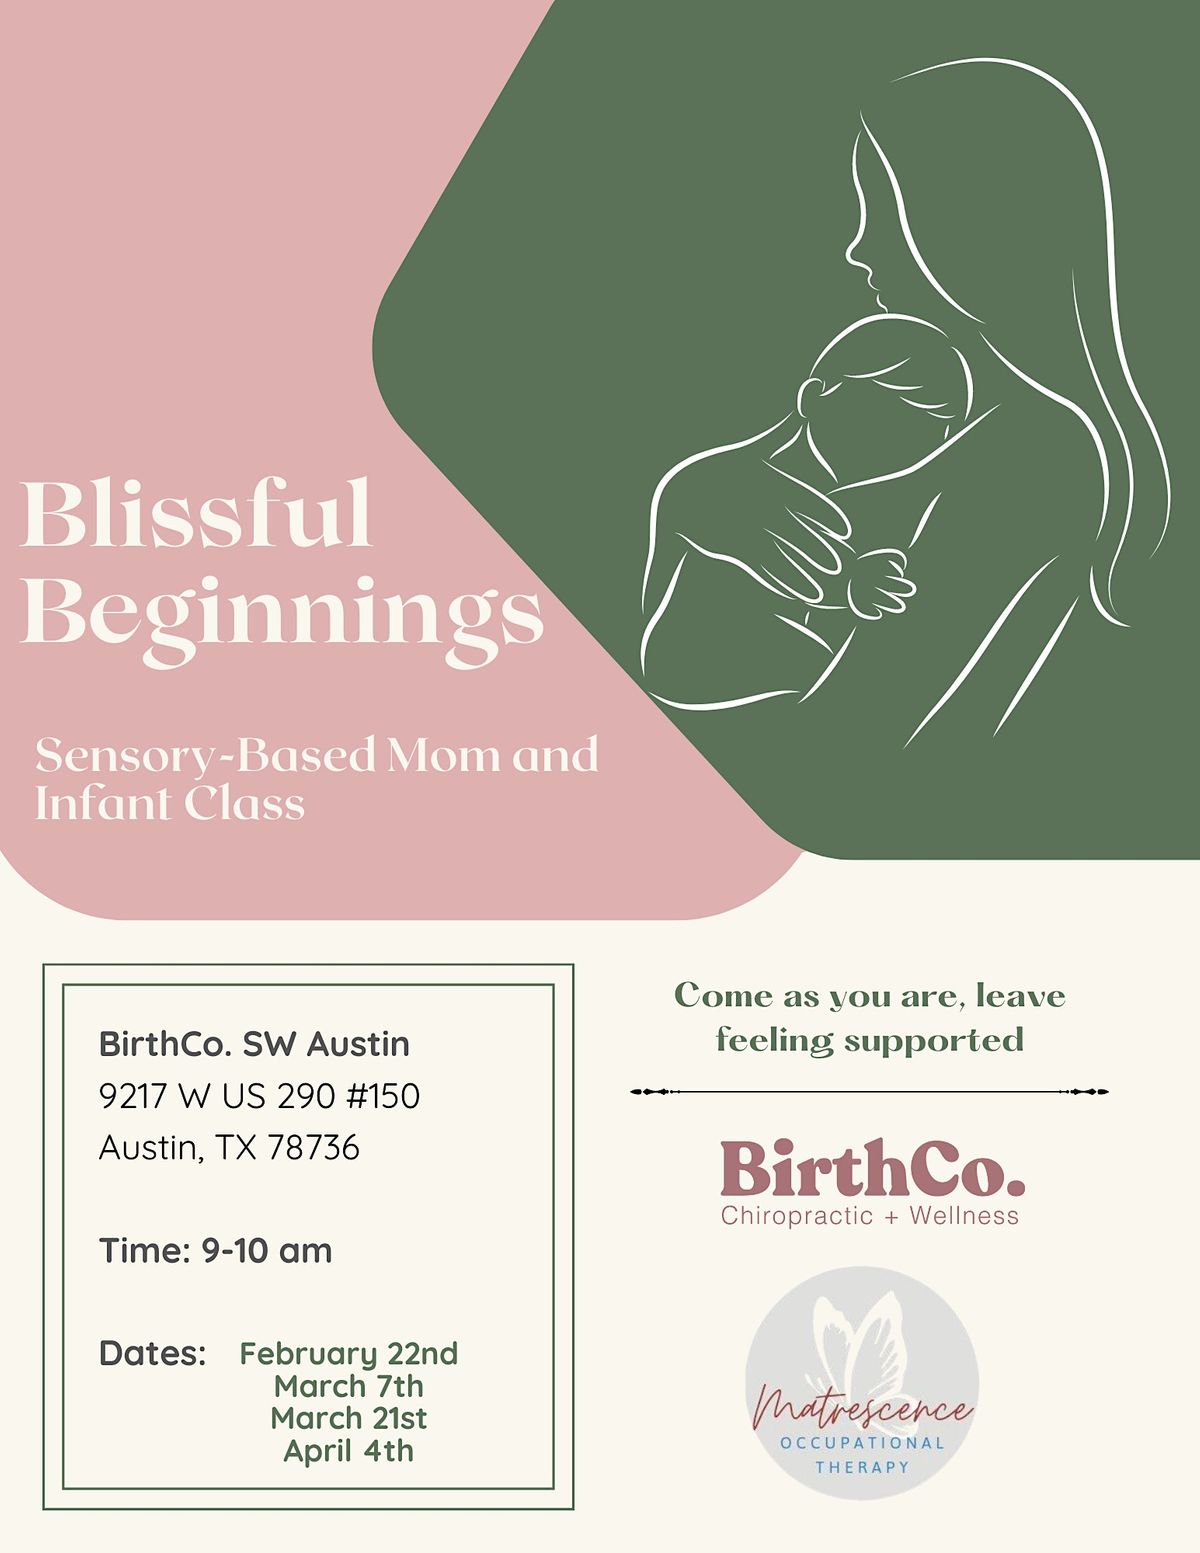 Blissful Beginnings - Mom and Infant Class